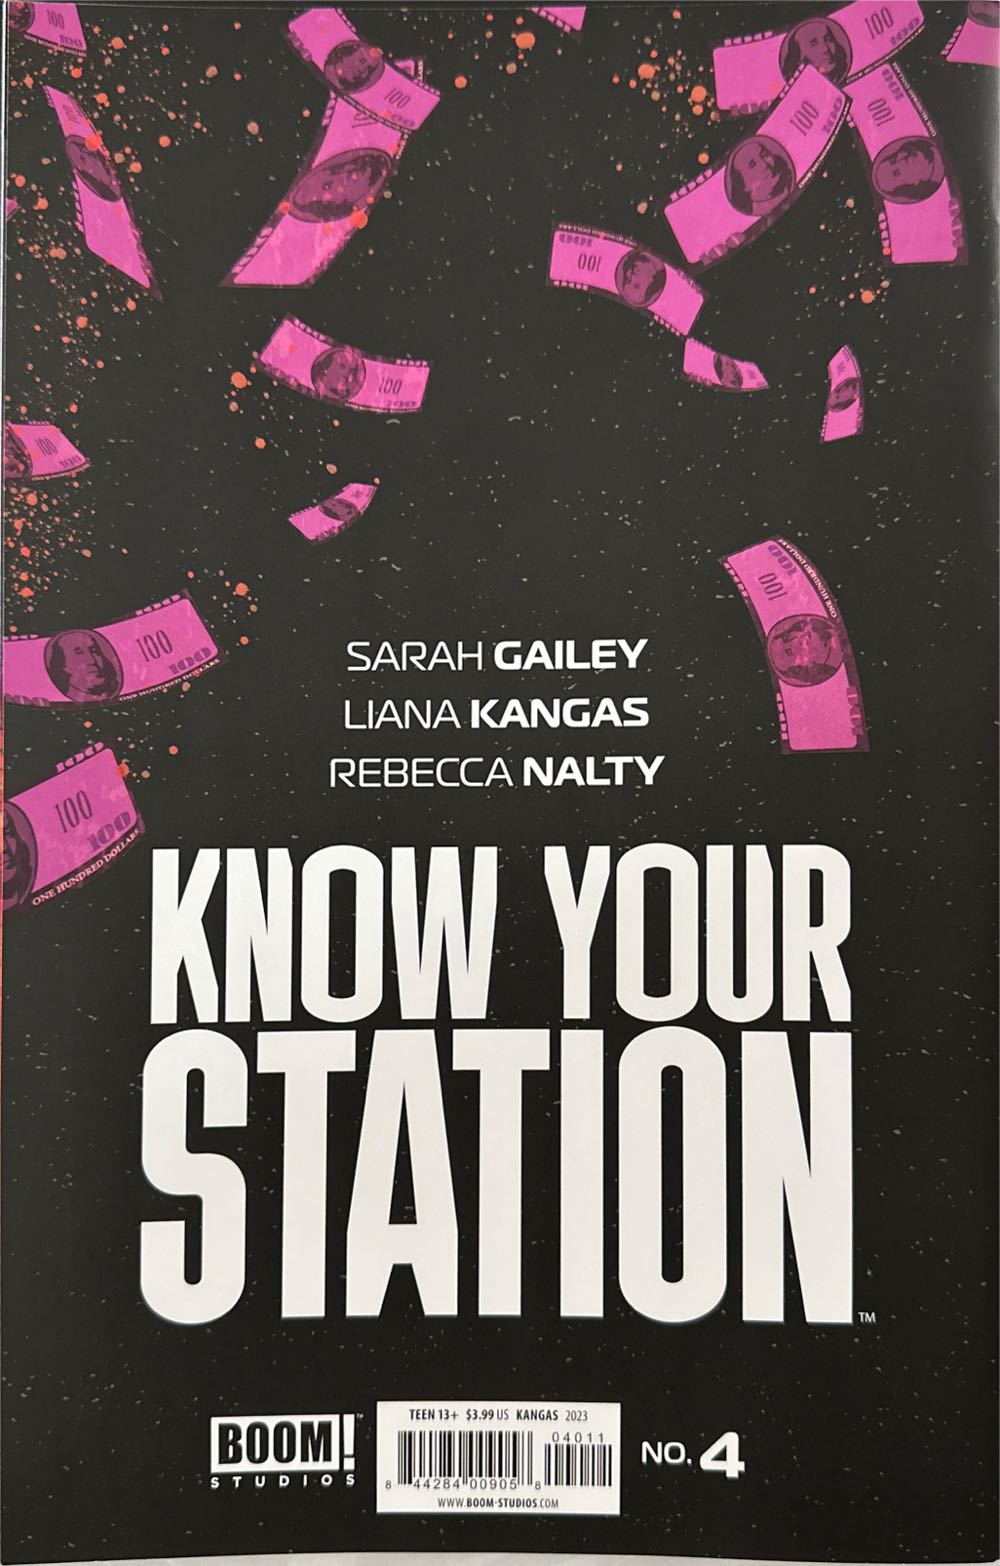 Know Your Station - BOOM!studios (4) comic book collectible [Barcode 84428400905804011] - Main Image 2